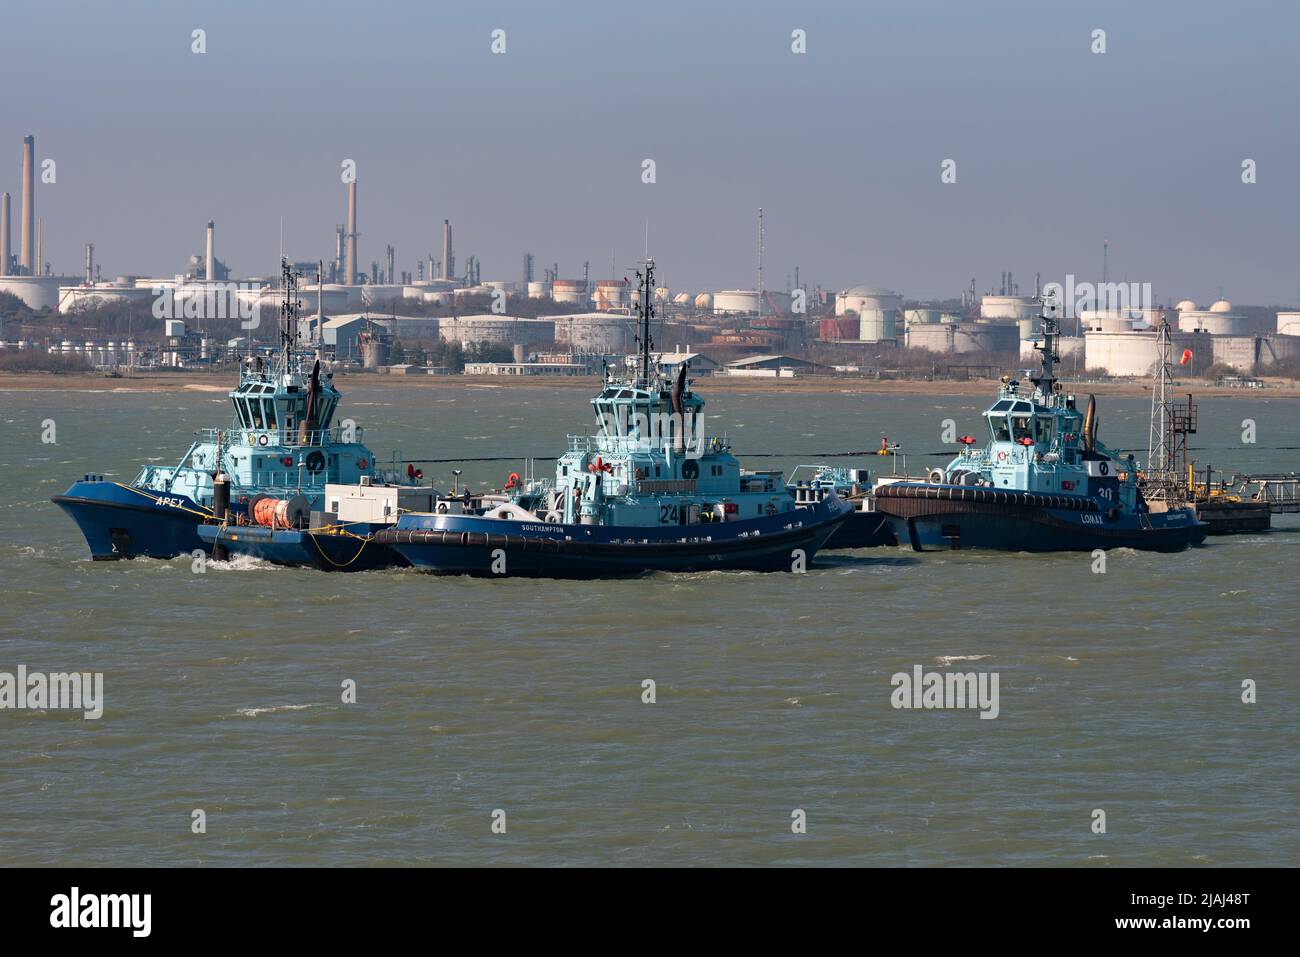 Fawley, Southampton, England, UK. 2022.  Three ocean going tugs alongside a jetty with a background of Fawley Refinery, chimneys and smoke stacks, Stock Photo